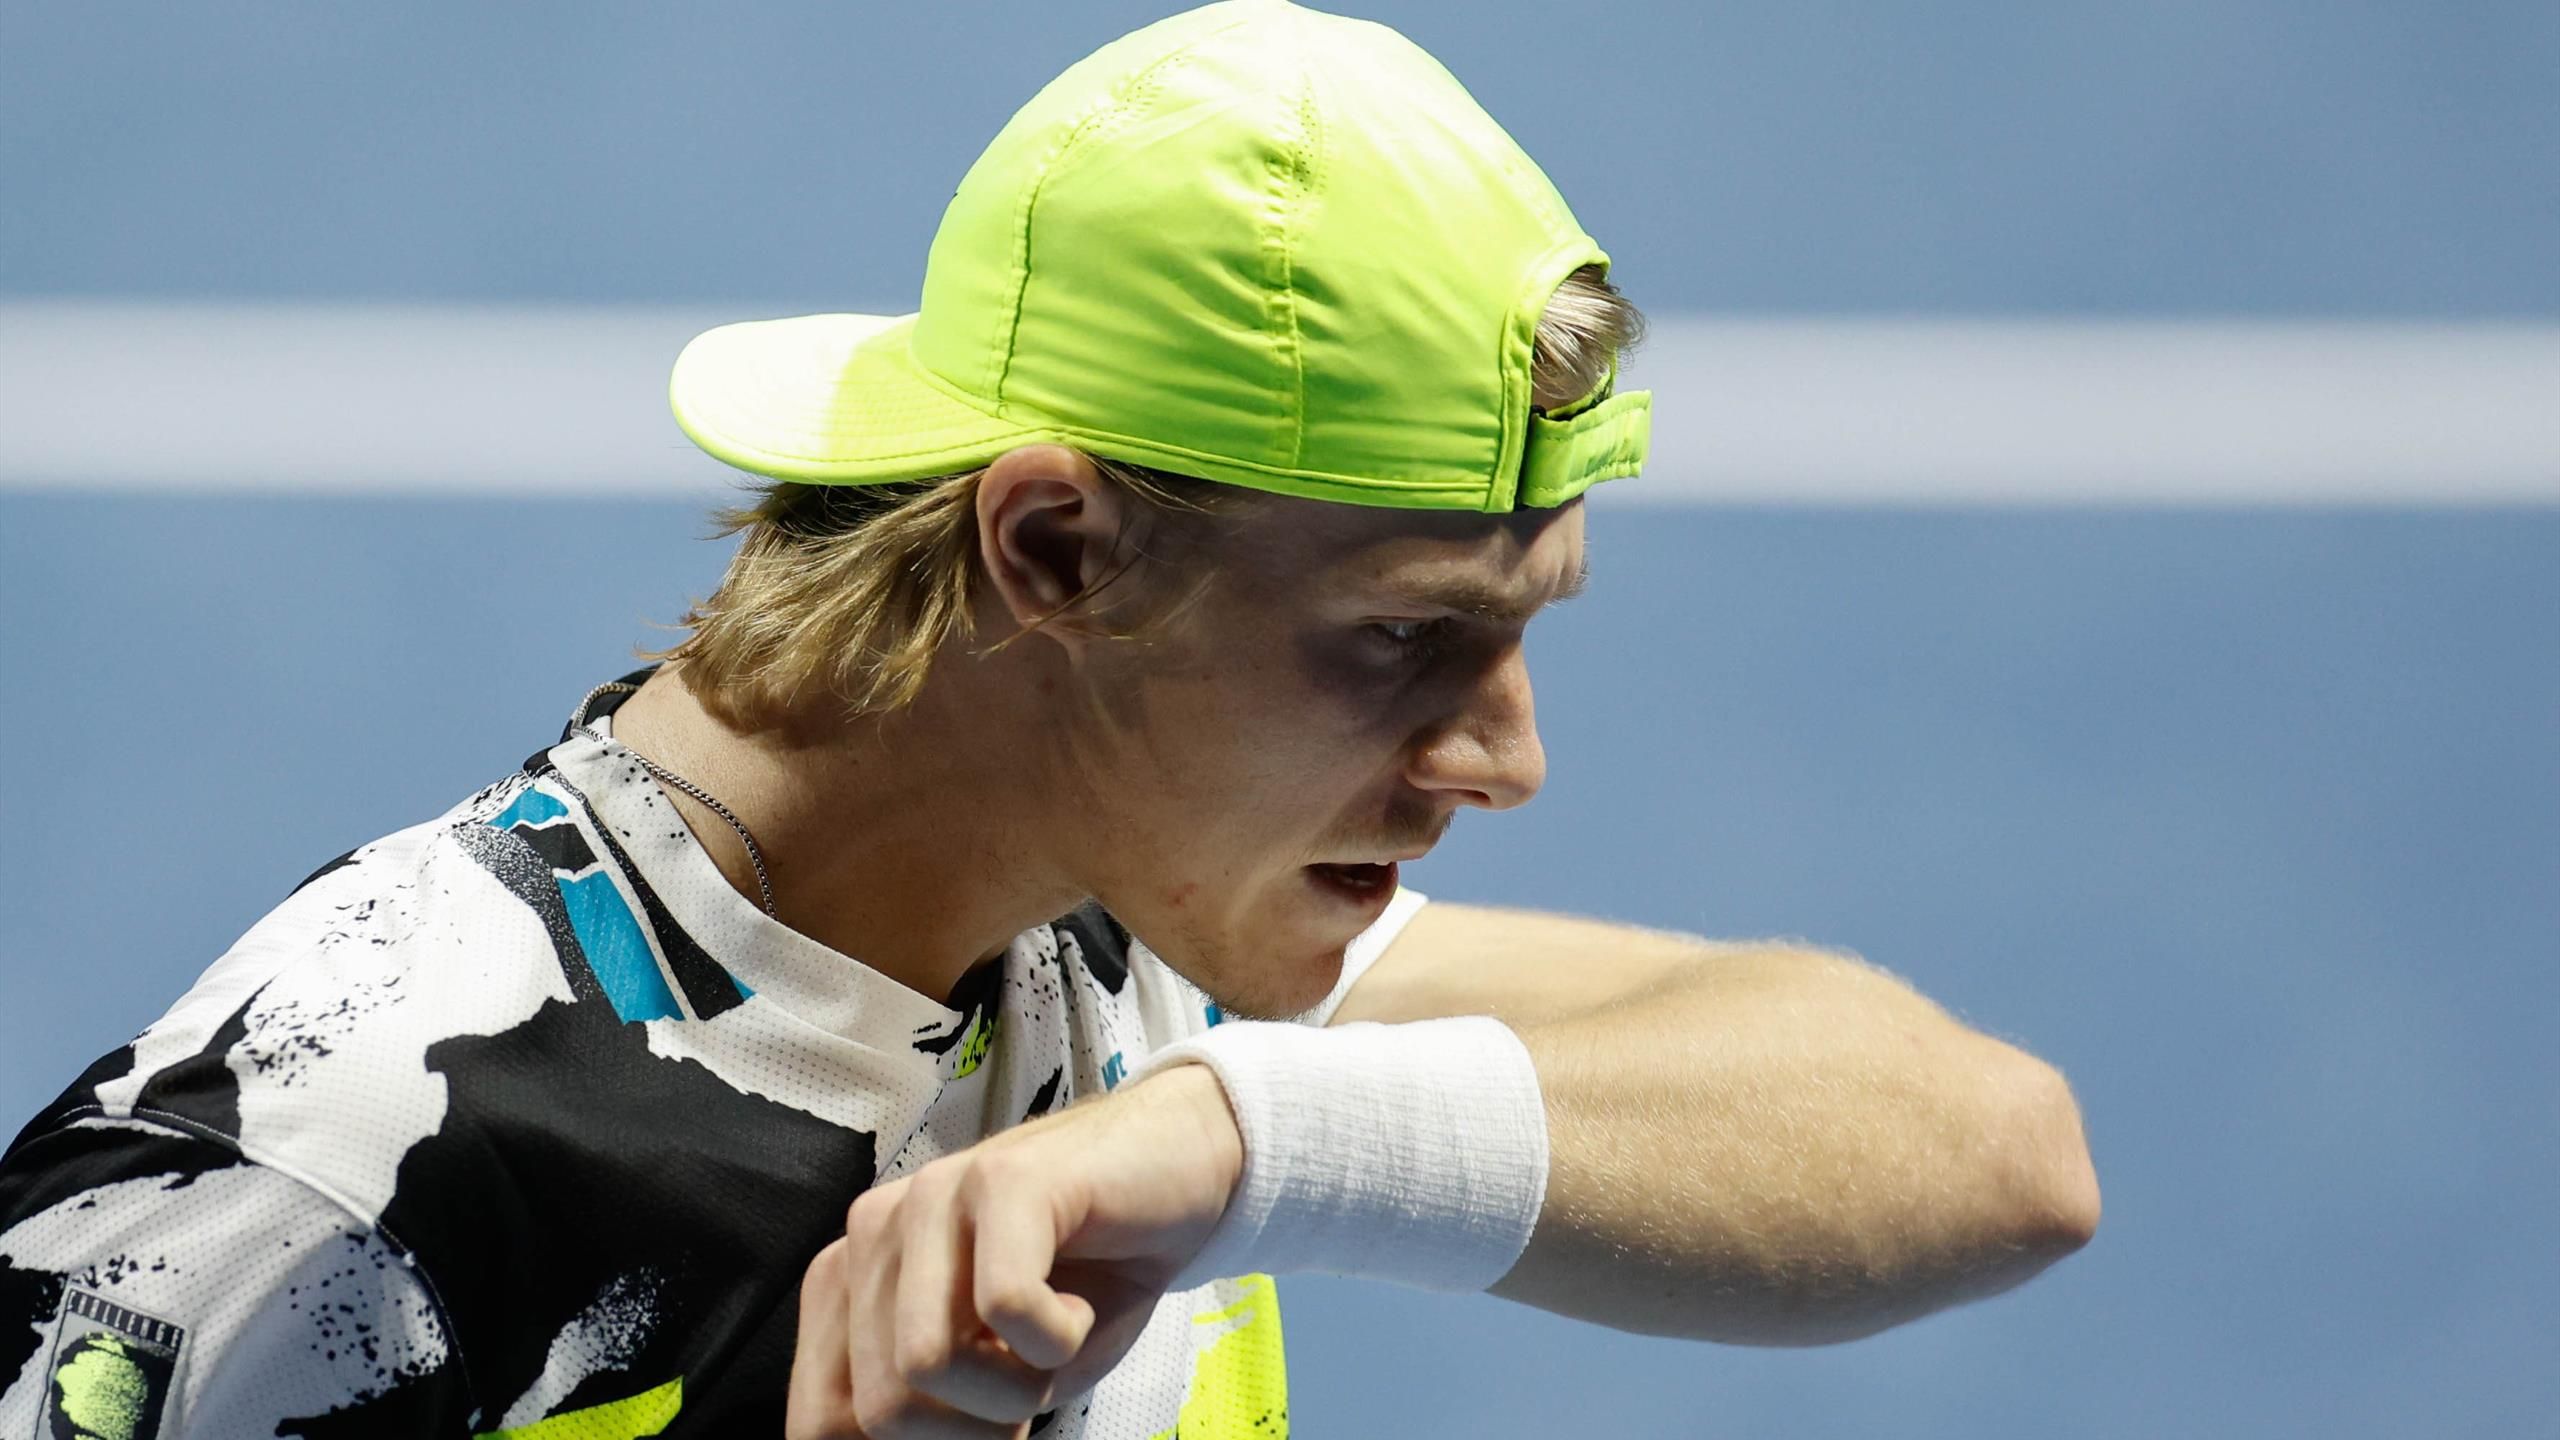 Denis Shapovalov shocked by Jurij Rodionov at Vienna Open, Cameron Norrie loses at Astana Open